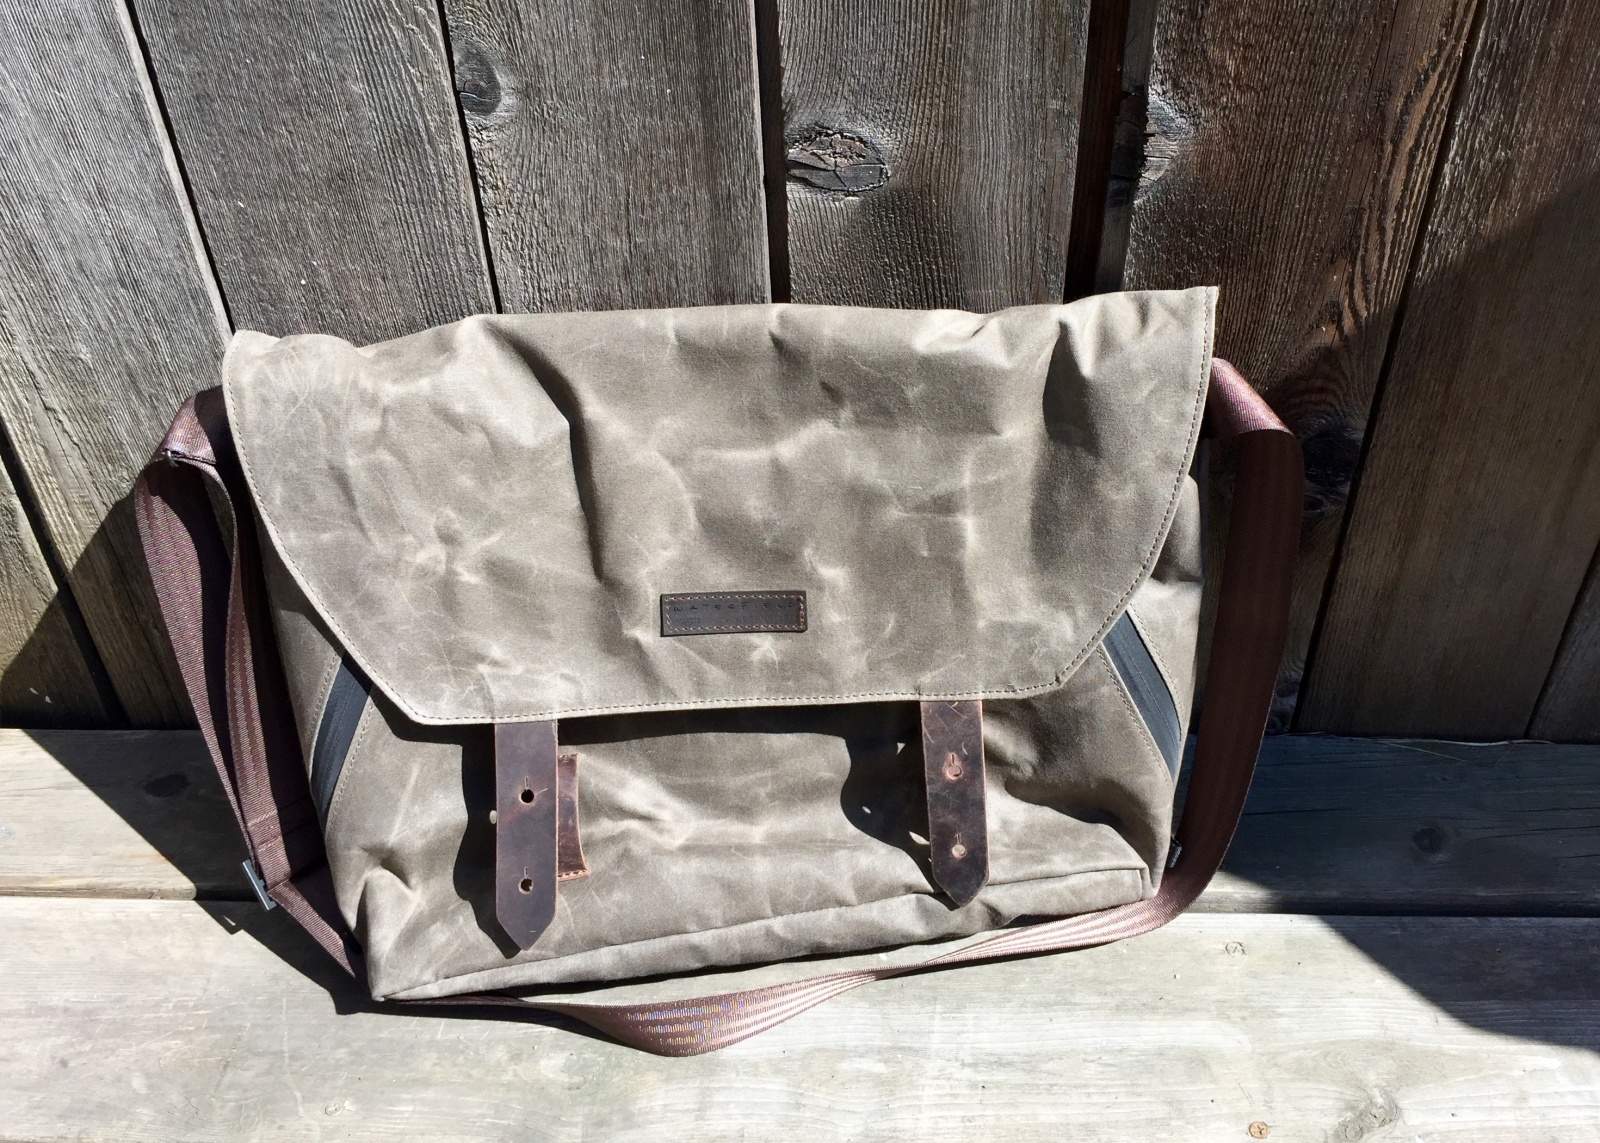 Get all your stuff together in this lightweight, classy, functional messenger bag.